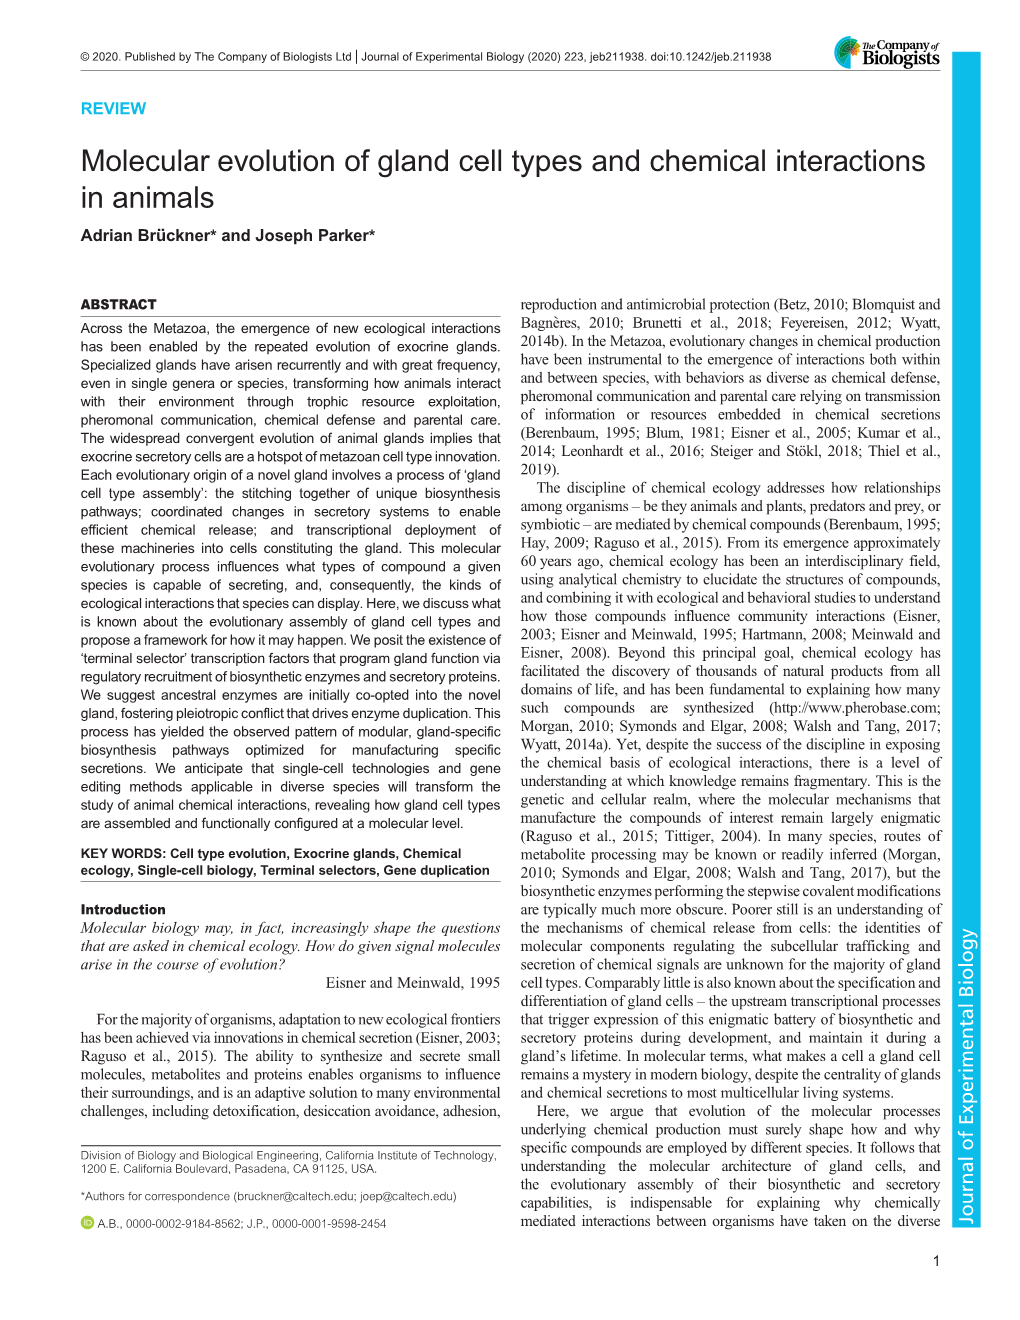 Molecular Evolution of Gland Cell Types and Chemical Interactions in Animals Adrian Brückner* and Joseph Parker*